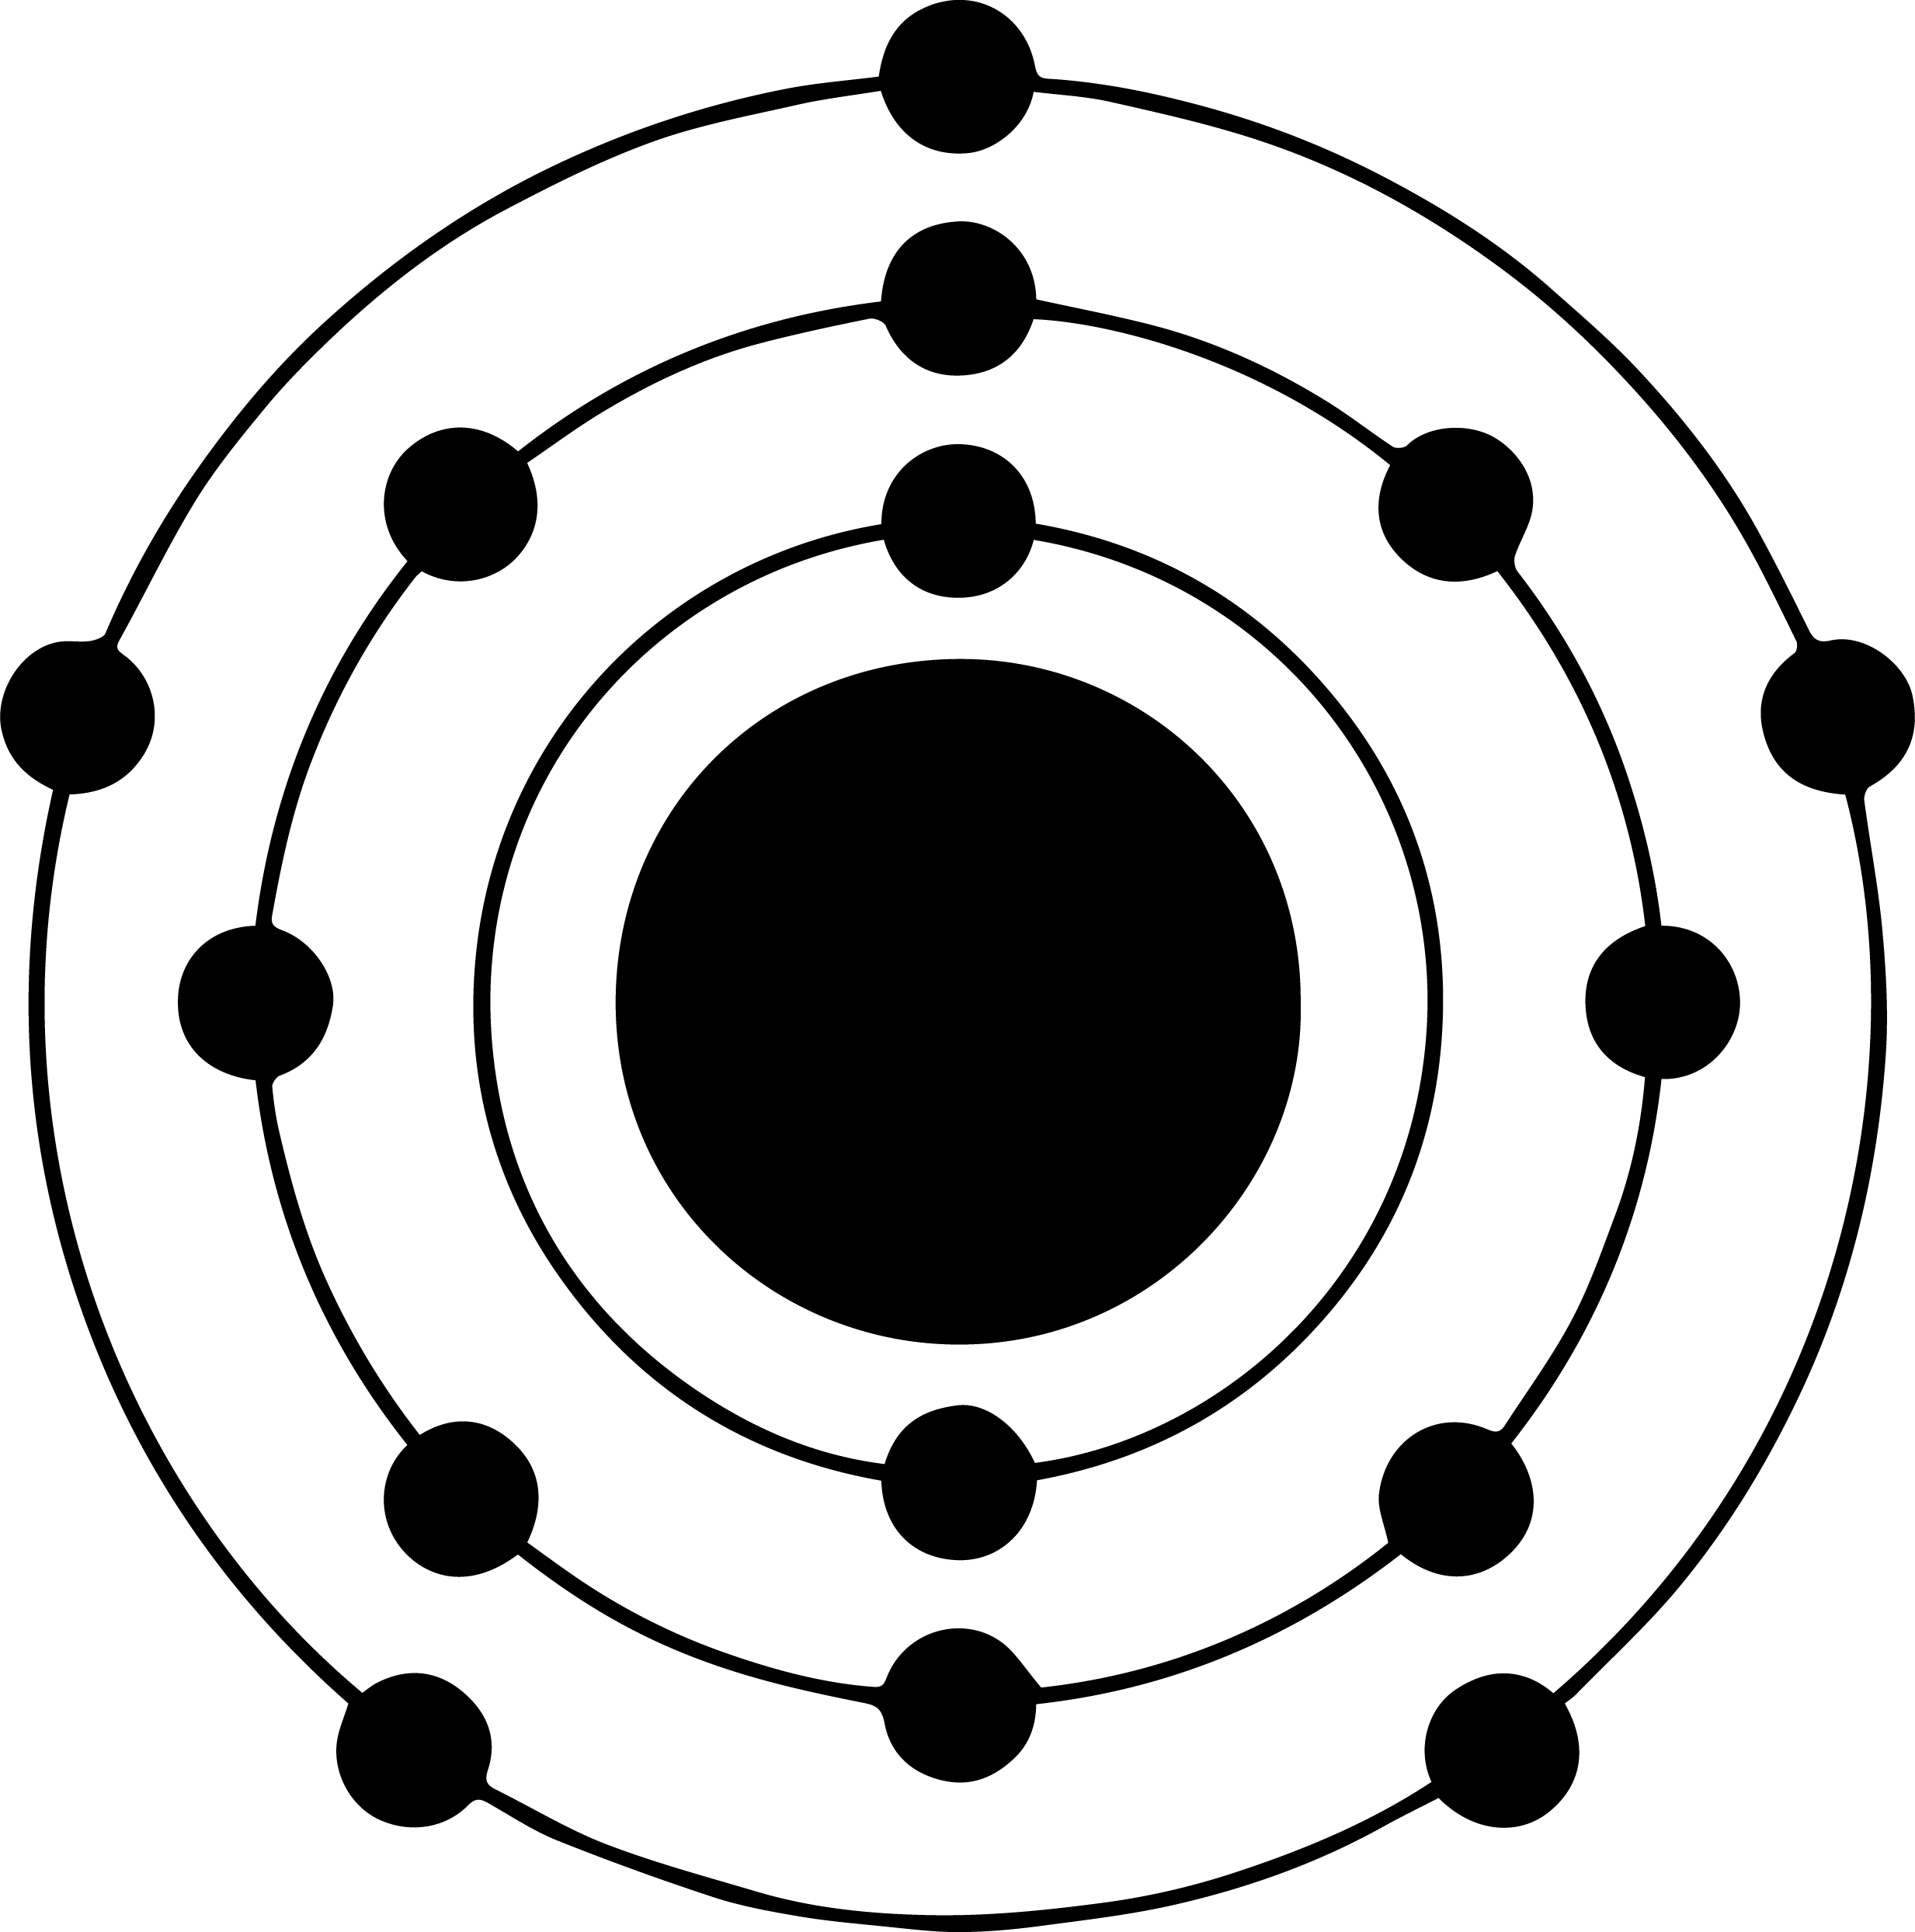 A drawing of a phosphorus atom represented as a large black circle on a white background surrounded by 3 thin black rings with 2 small black circles on the inner ring, 8 small black circles on the second ring and 5 small black circles on the outermost ring. All the small circles are evenly spaced on their rings.